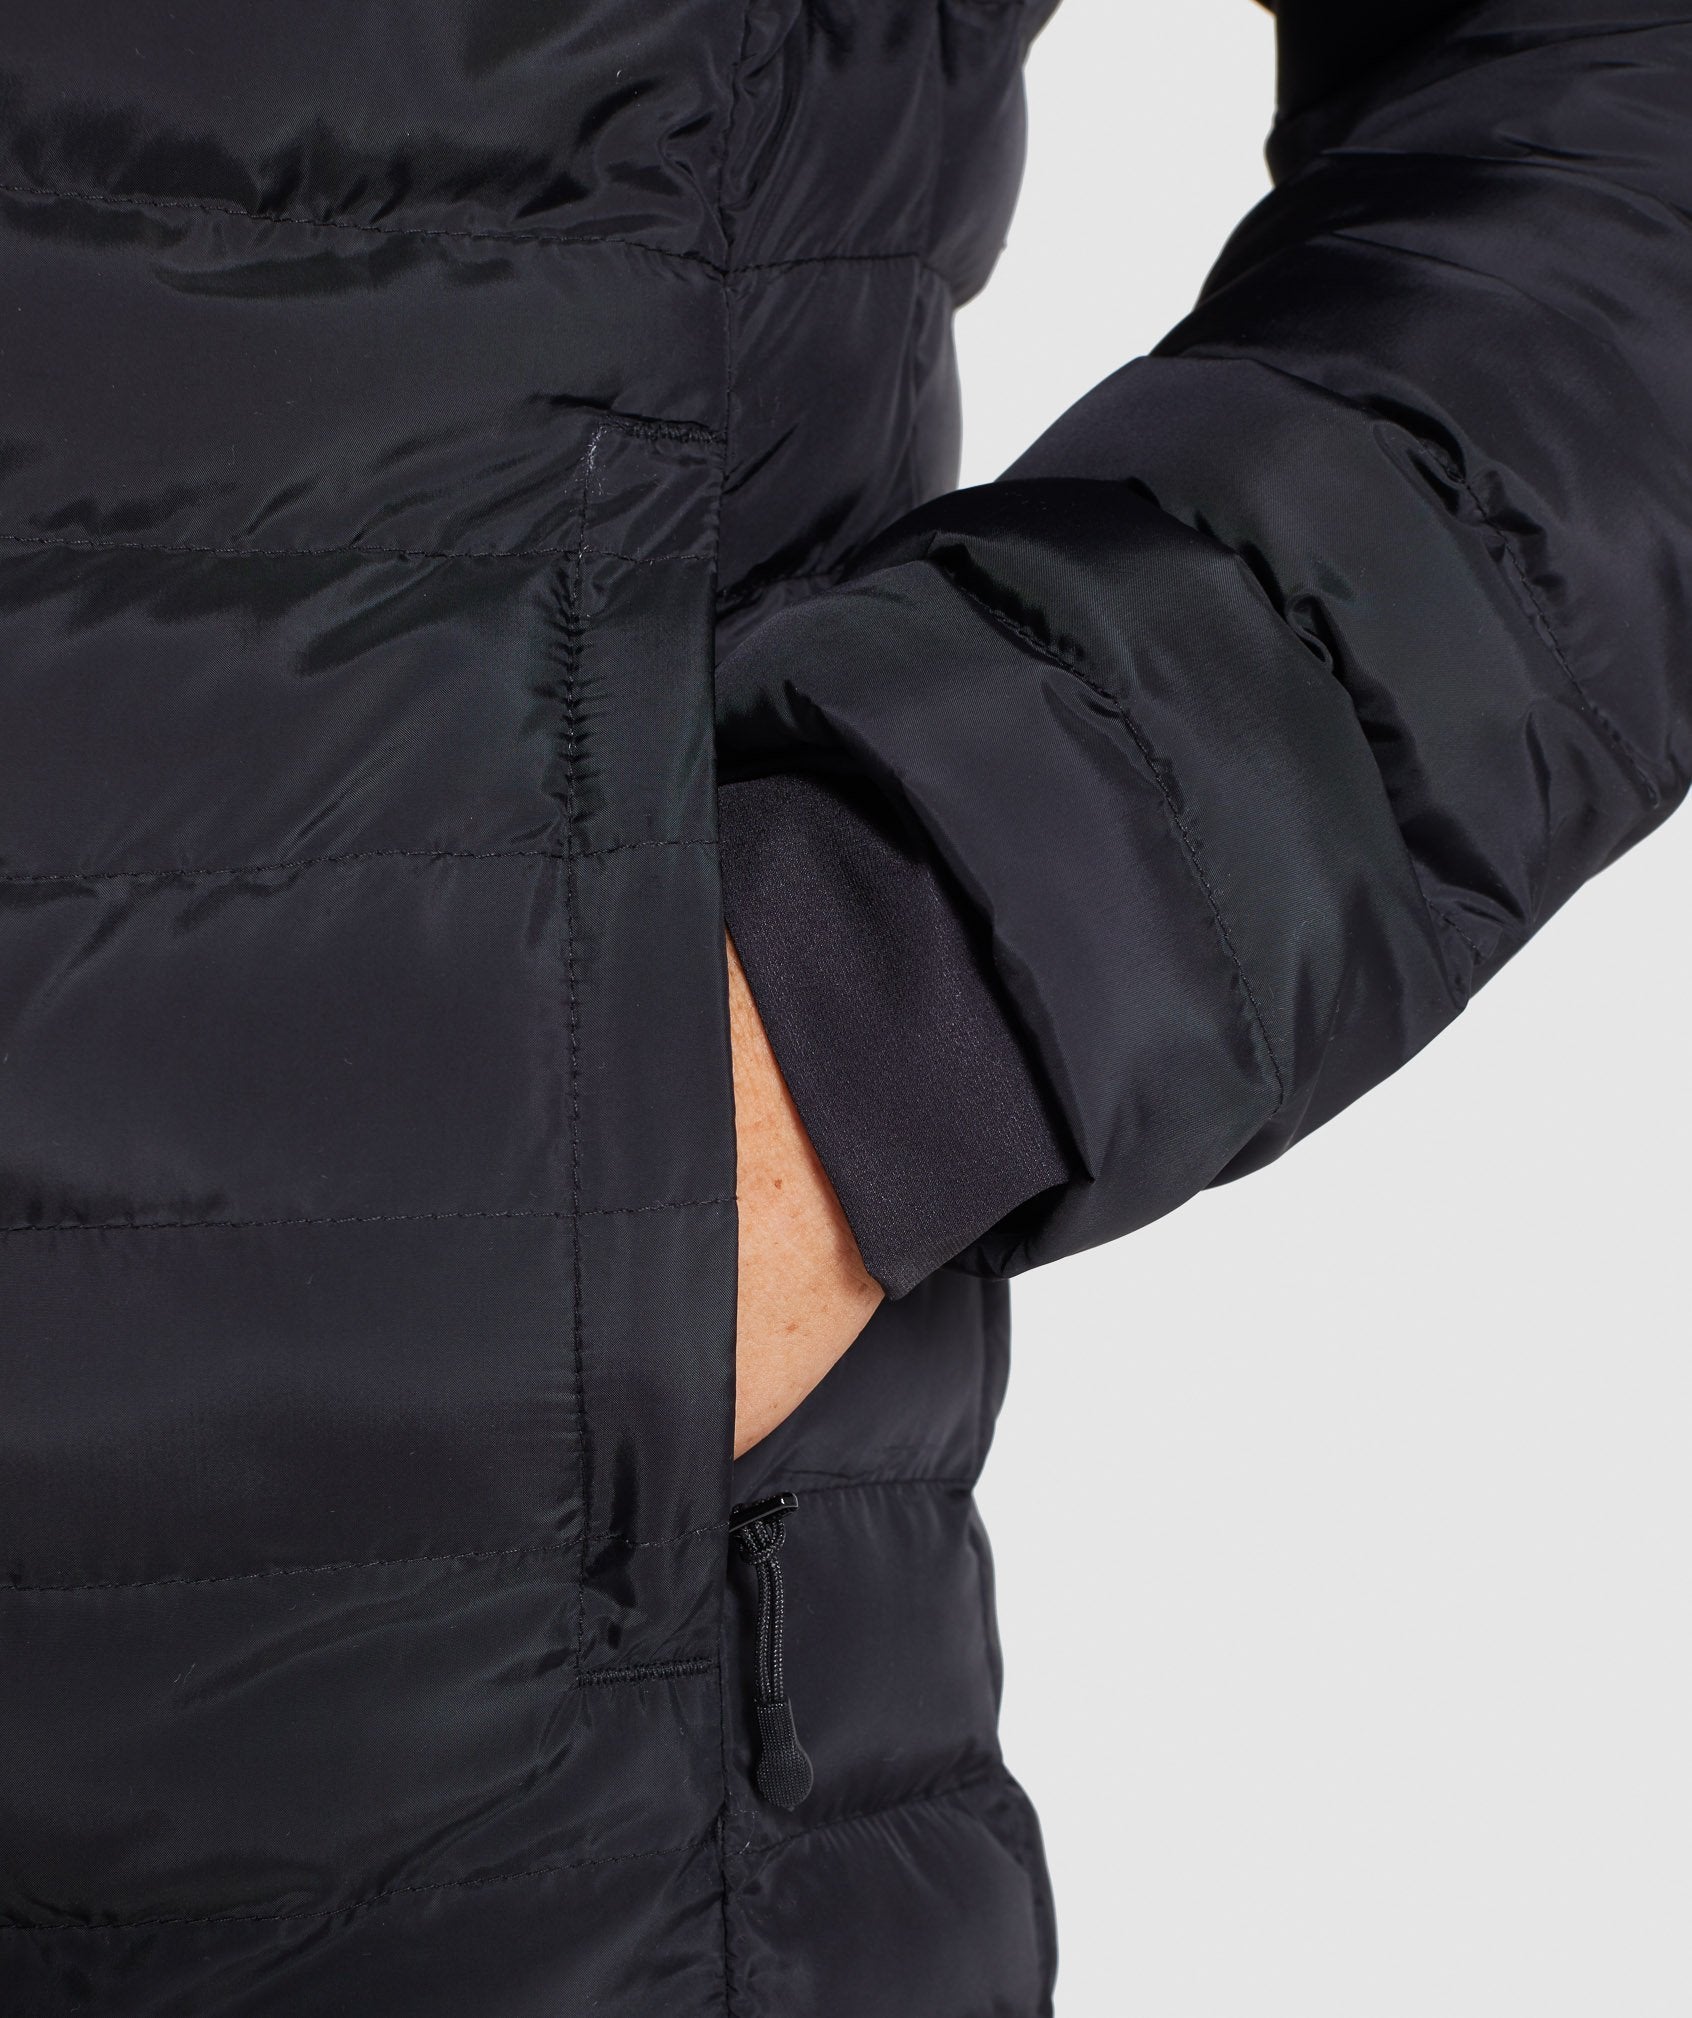 Sector Jacket V2 in Black - view 5